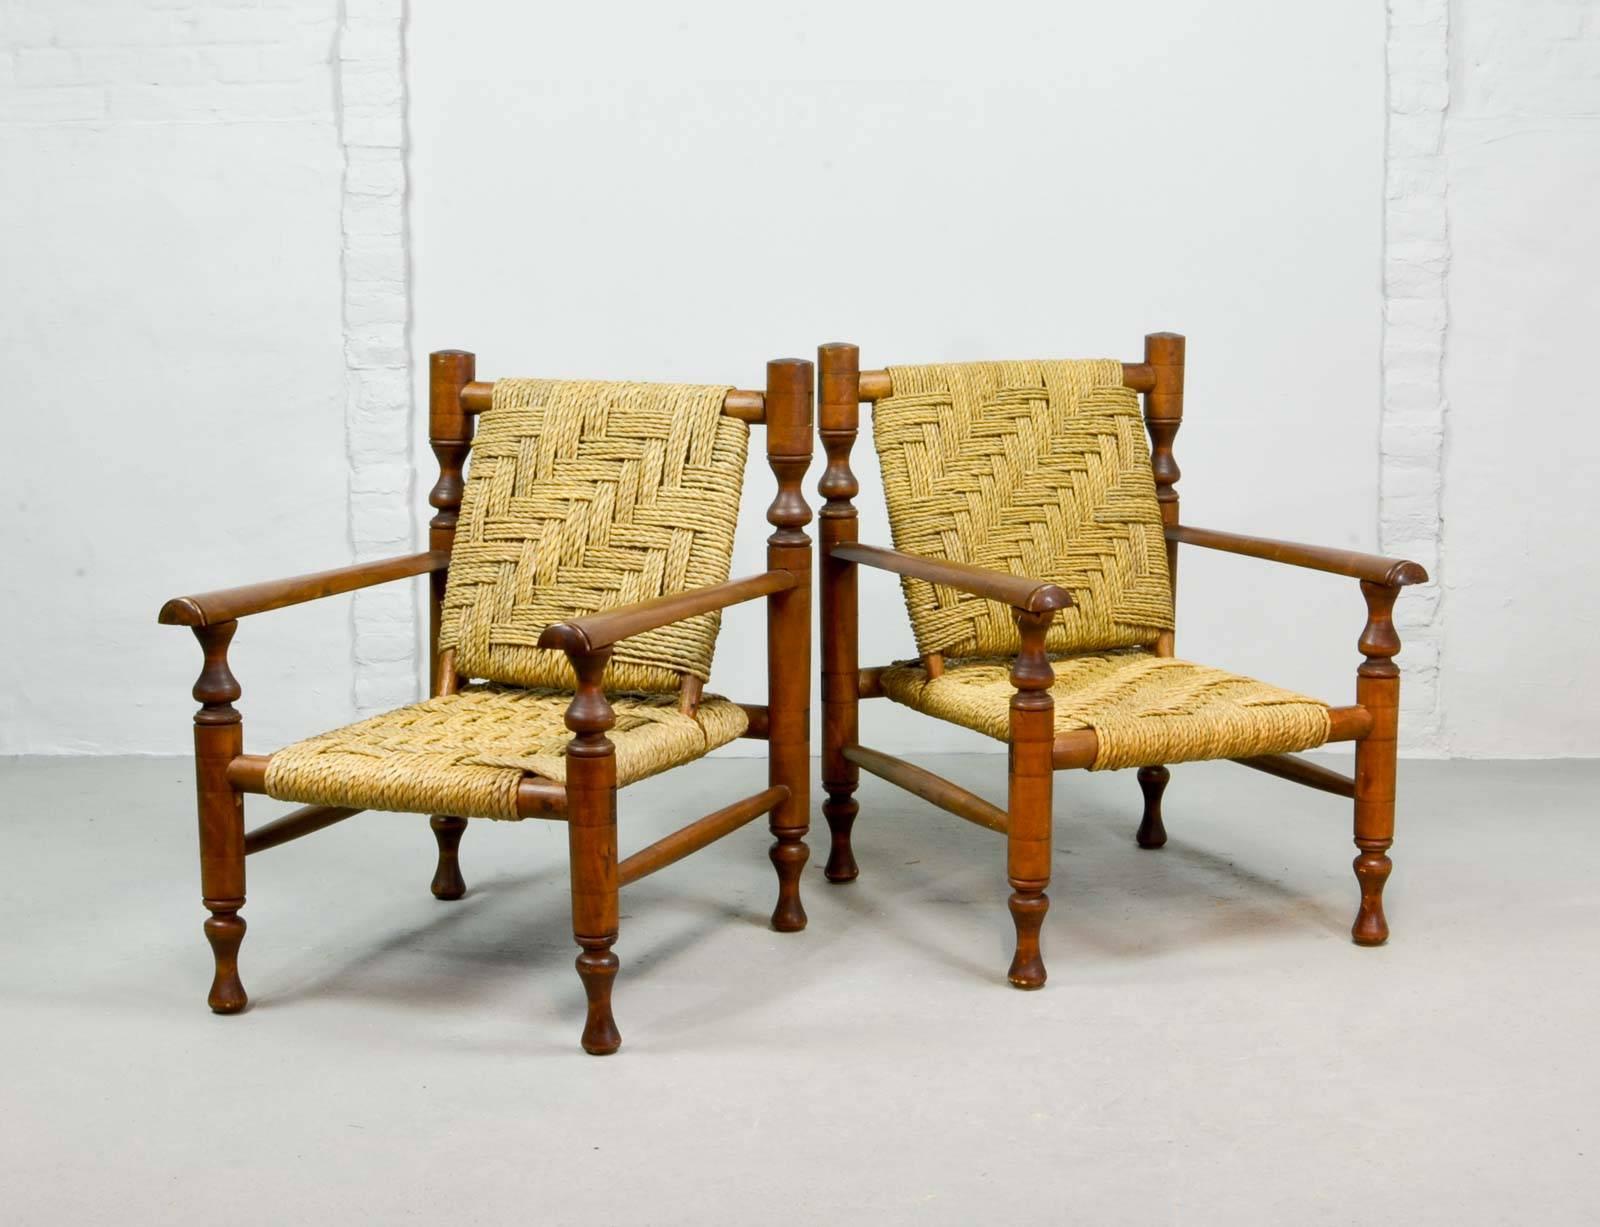 A rare pair of lounge chairs in the style of Charlotte Perriand. The frame of the chairs are build out of ashwood and come with a woven sisal rope seat and backrest. The chairs do have a craftsmanship structure and are beautiful patinated. They